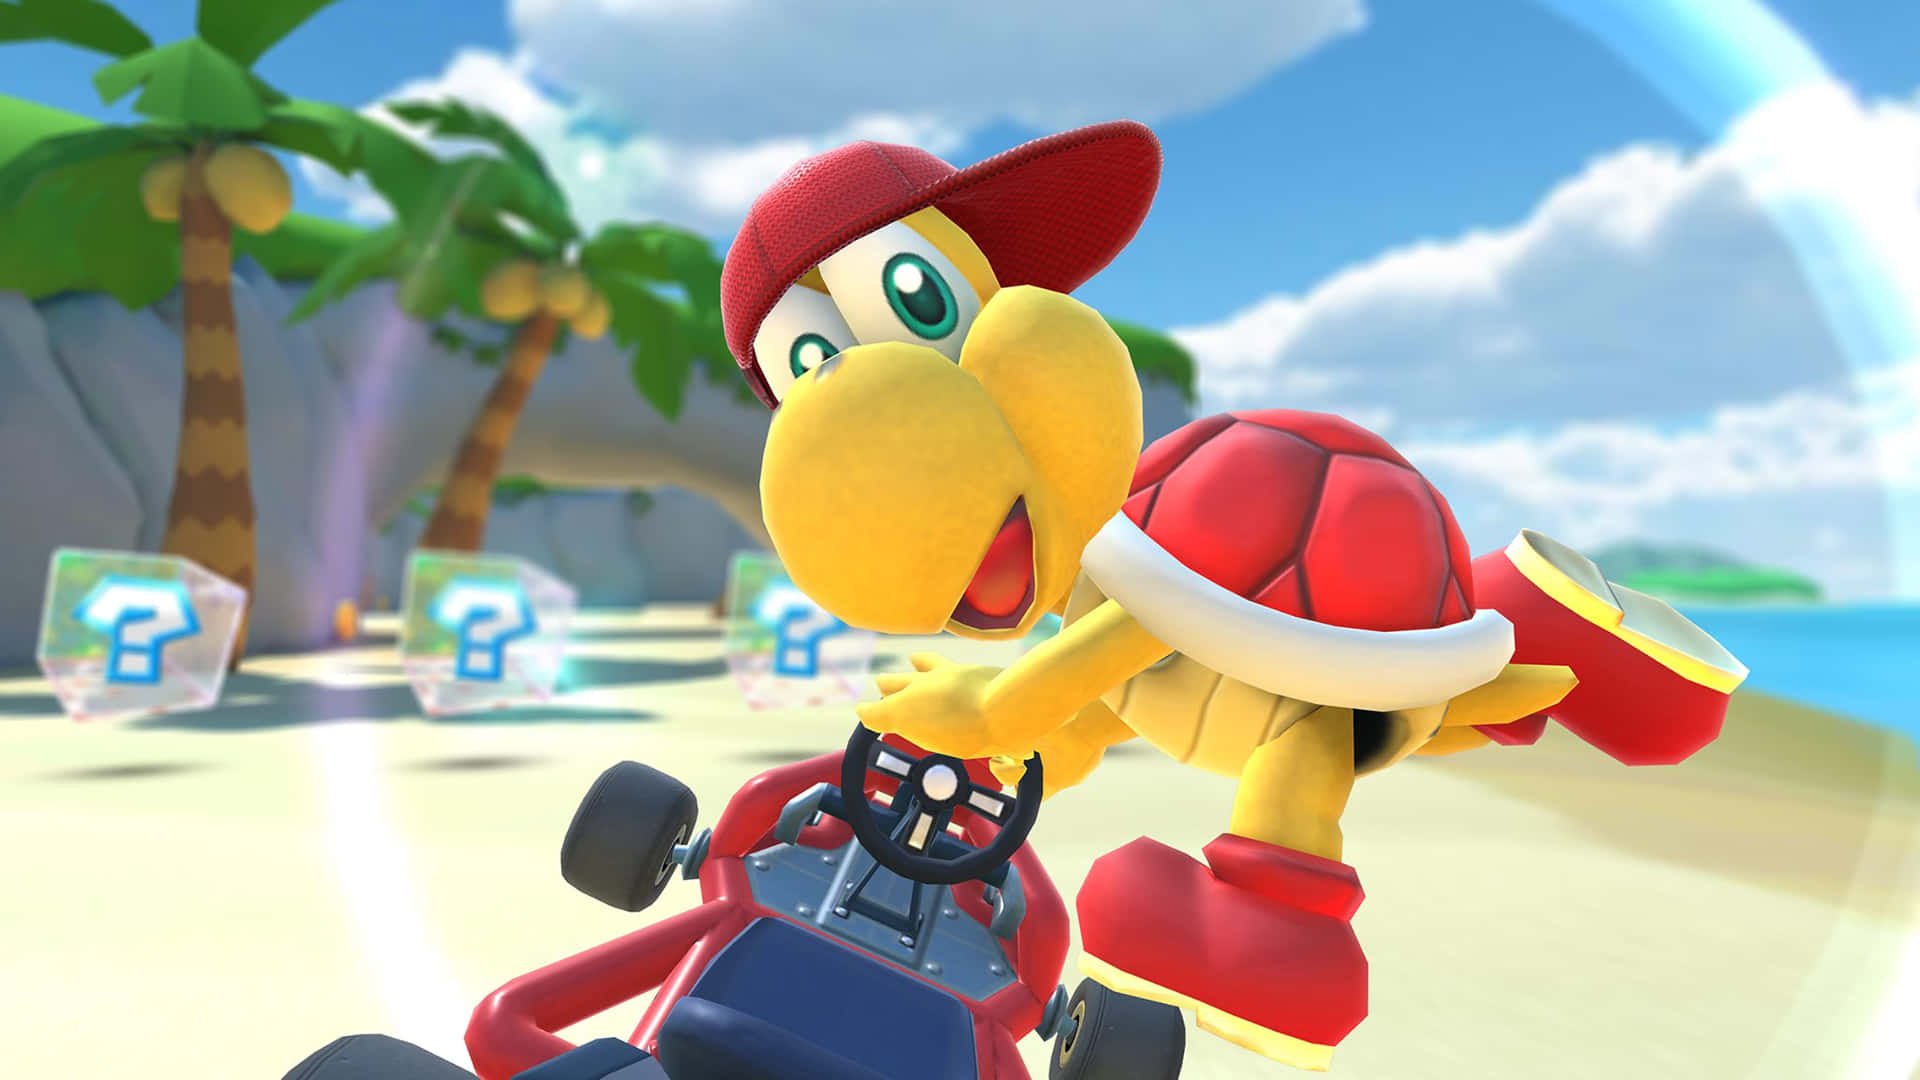 Koopa Troopa in action on a vibrant background Wallpaper